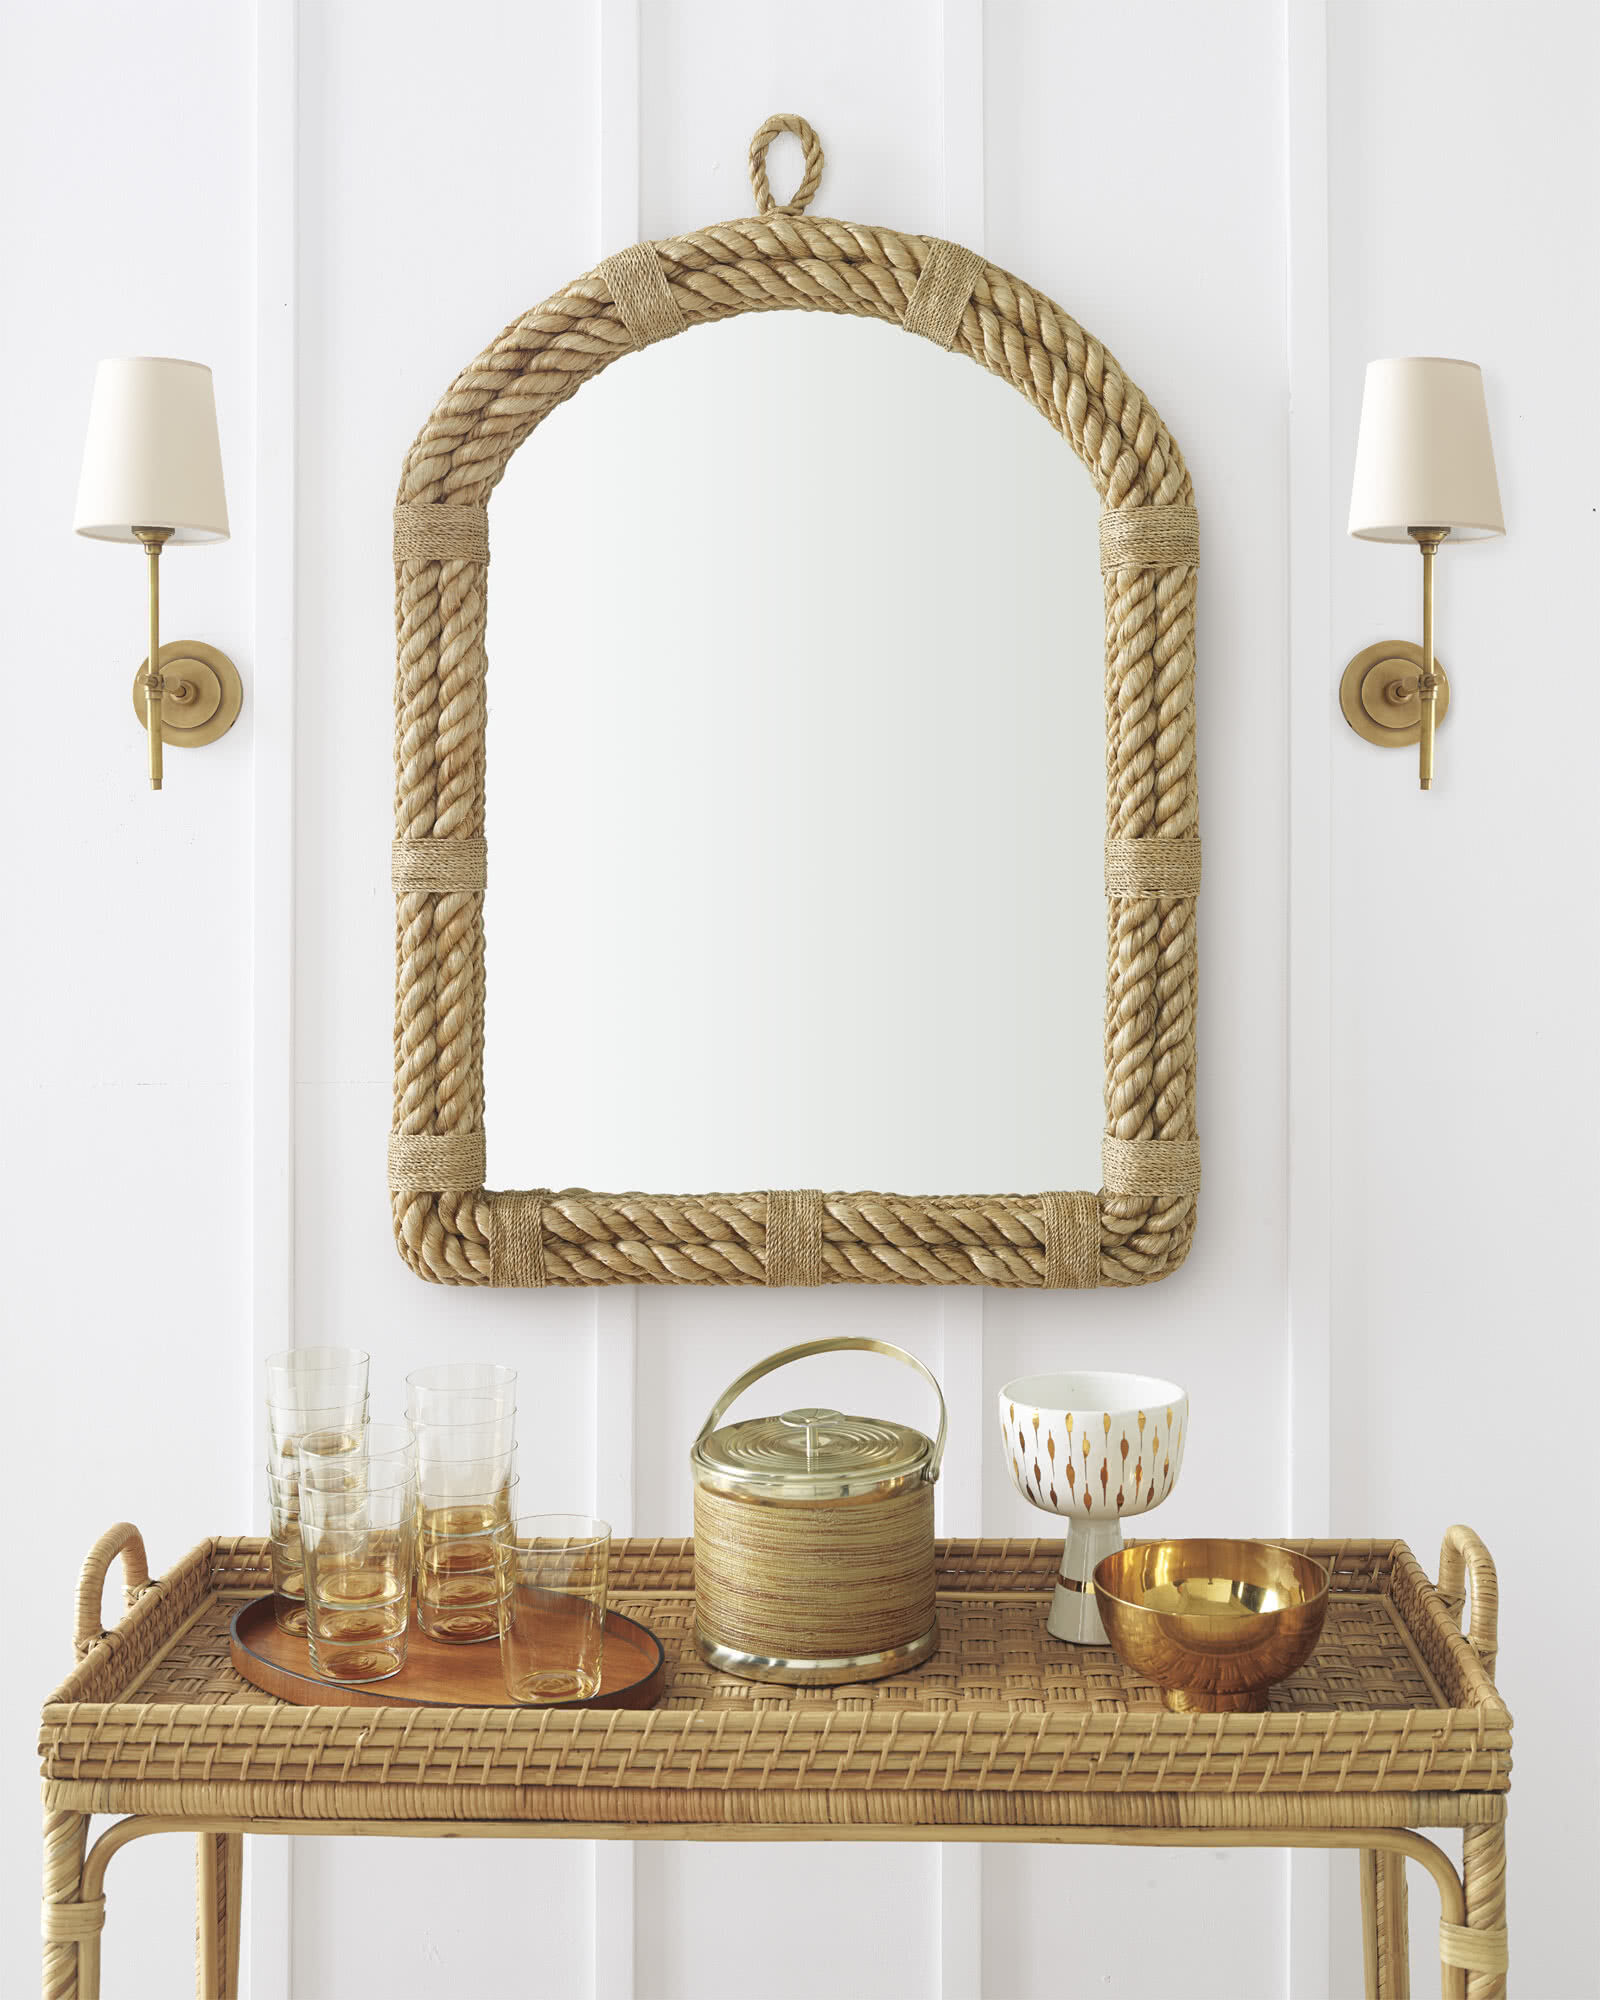 Hang a Mirror Over Your Serving Cart